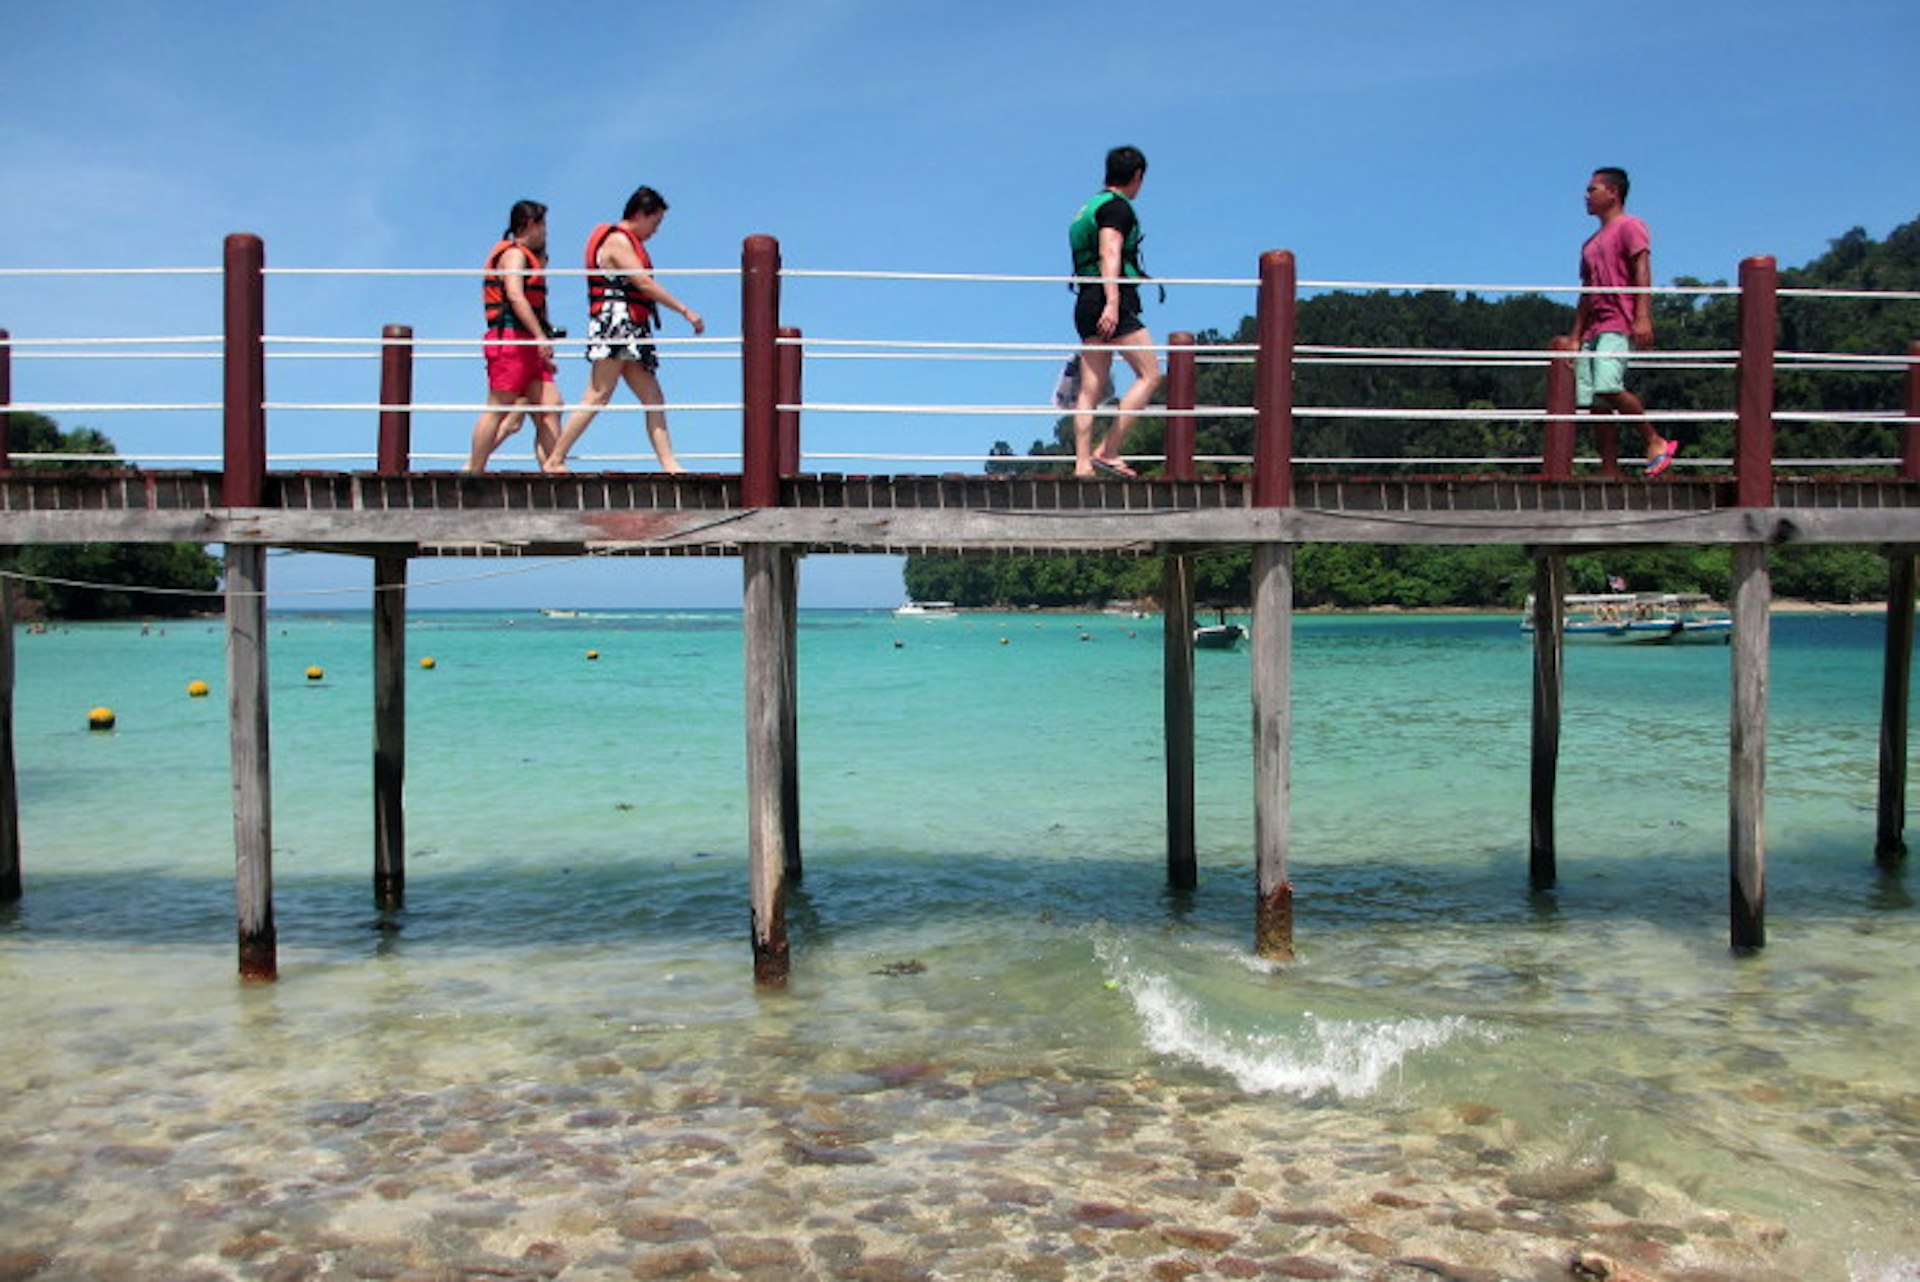 Pulau Sapi, left, connected to Pulau Gaya, right, via a zipline, is an easy day trip option from Kota Kinabalu. Image by Sarah Reid Lonely Planet